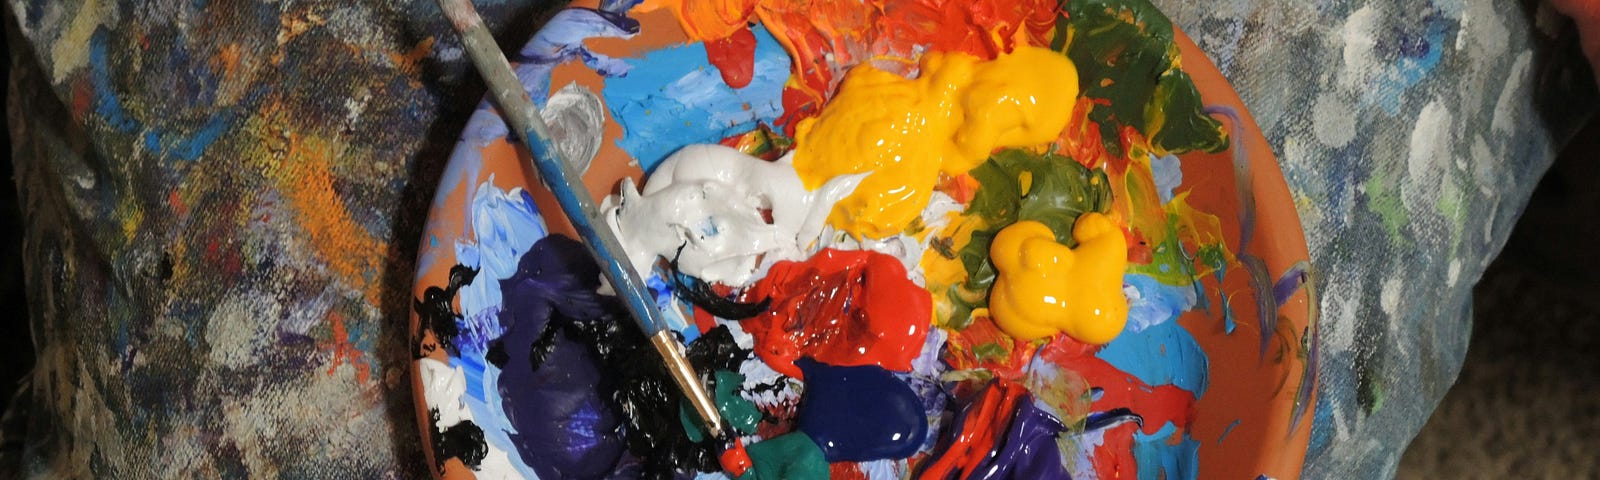 A painter palate with oil paints of yellow, blue, orange, red and green and other colors, in a wooden bowl with a paint brush dipped into the green.